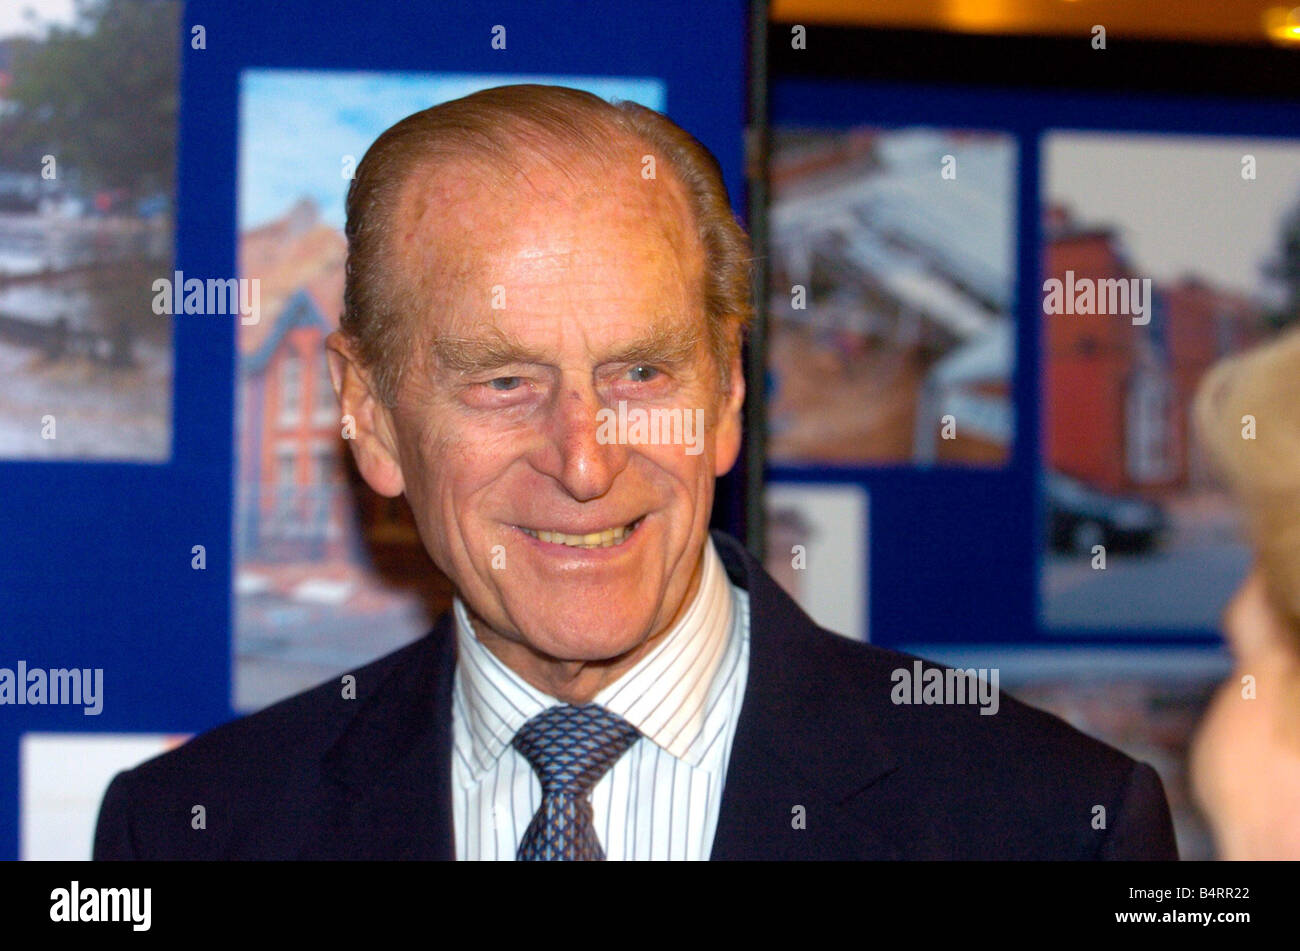 The Duke of Edinburgh on his vist to the Lahore Karahi restaurant in Ladypool road Birmingham to talk to residents and emergency services who were involved with the Tornado Stock Photo